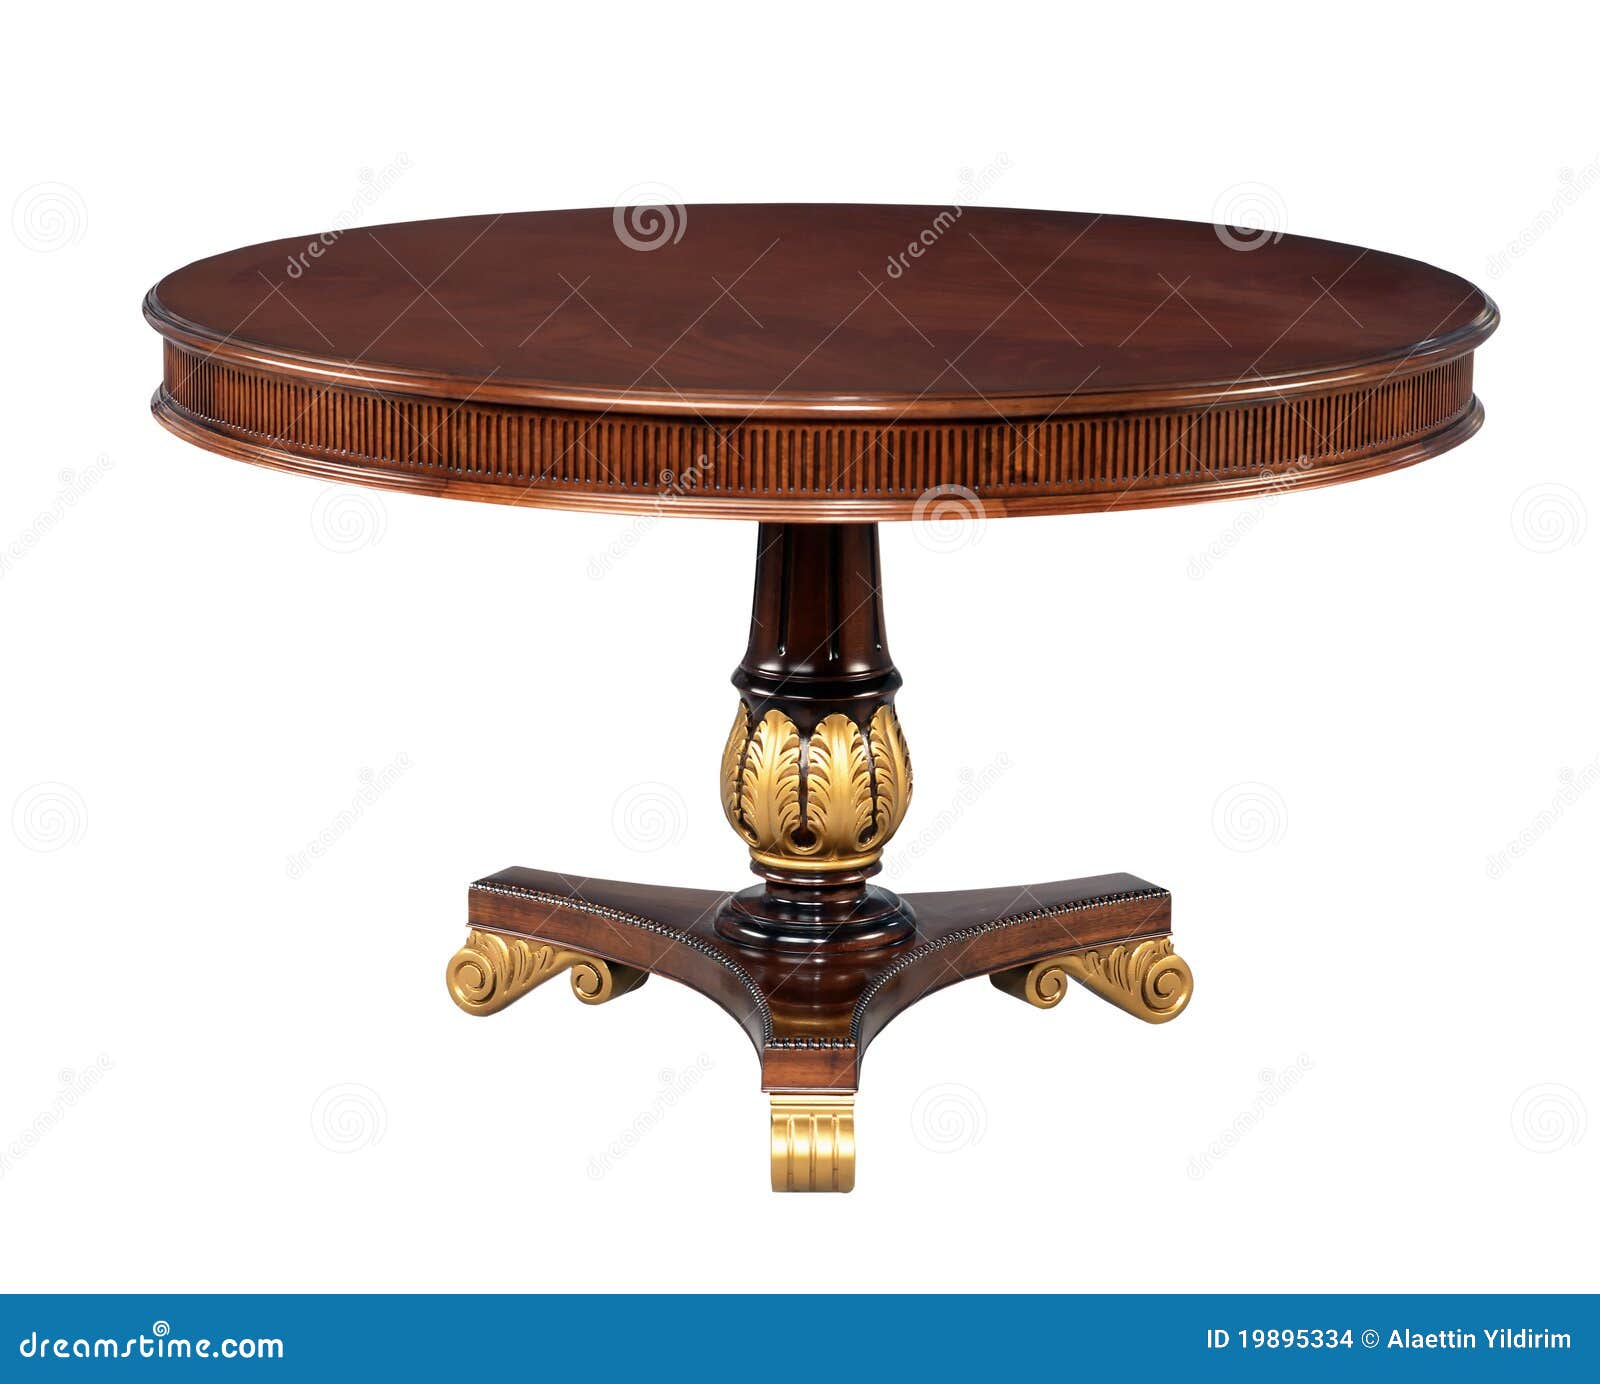 antique wooden round table